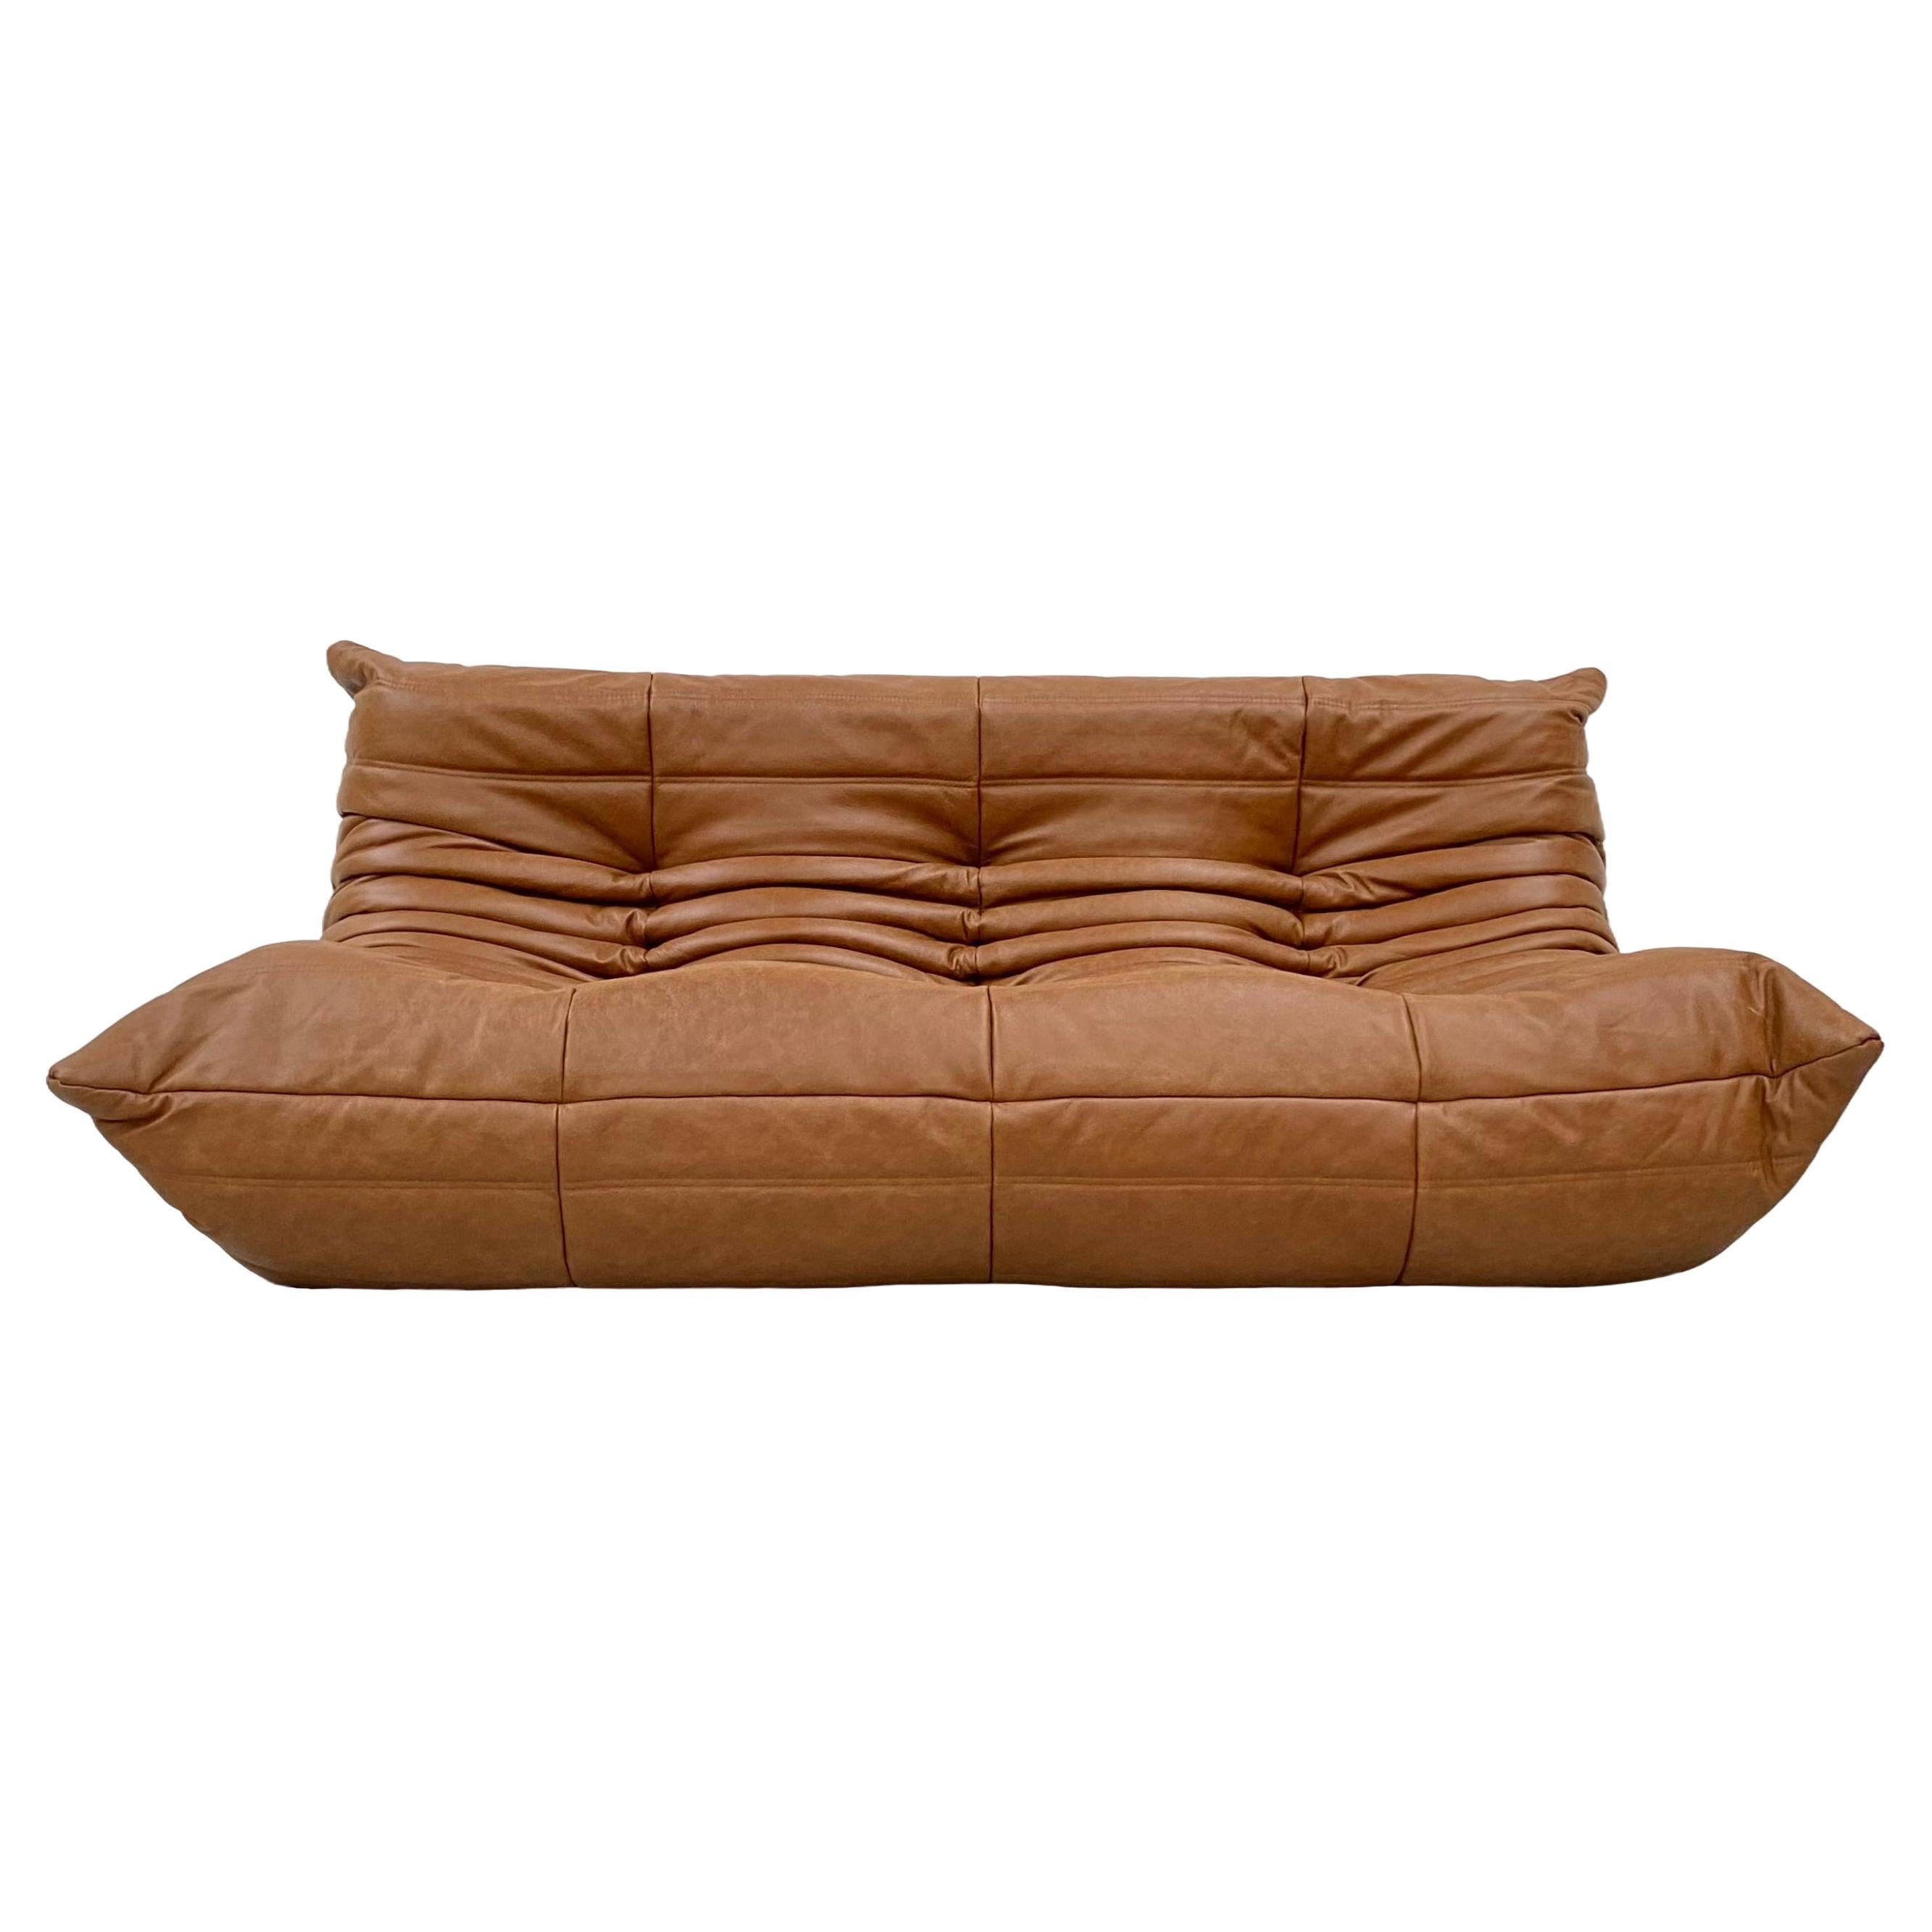 French Vintage Togo Sofa in Mid Brown Leather by Michel Ducaroy for Ligne Roset. For Sale